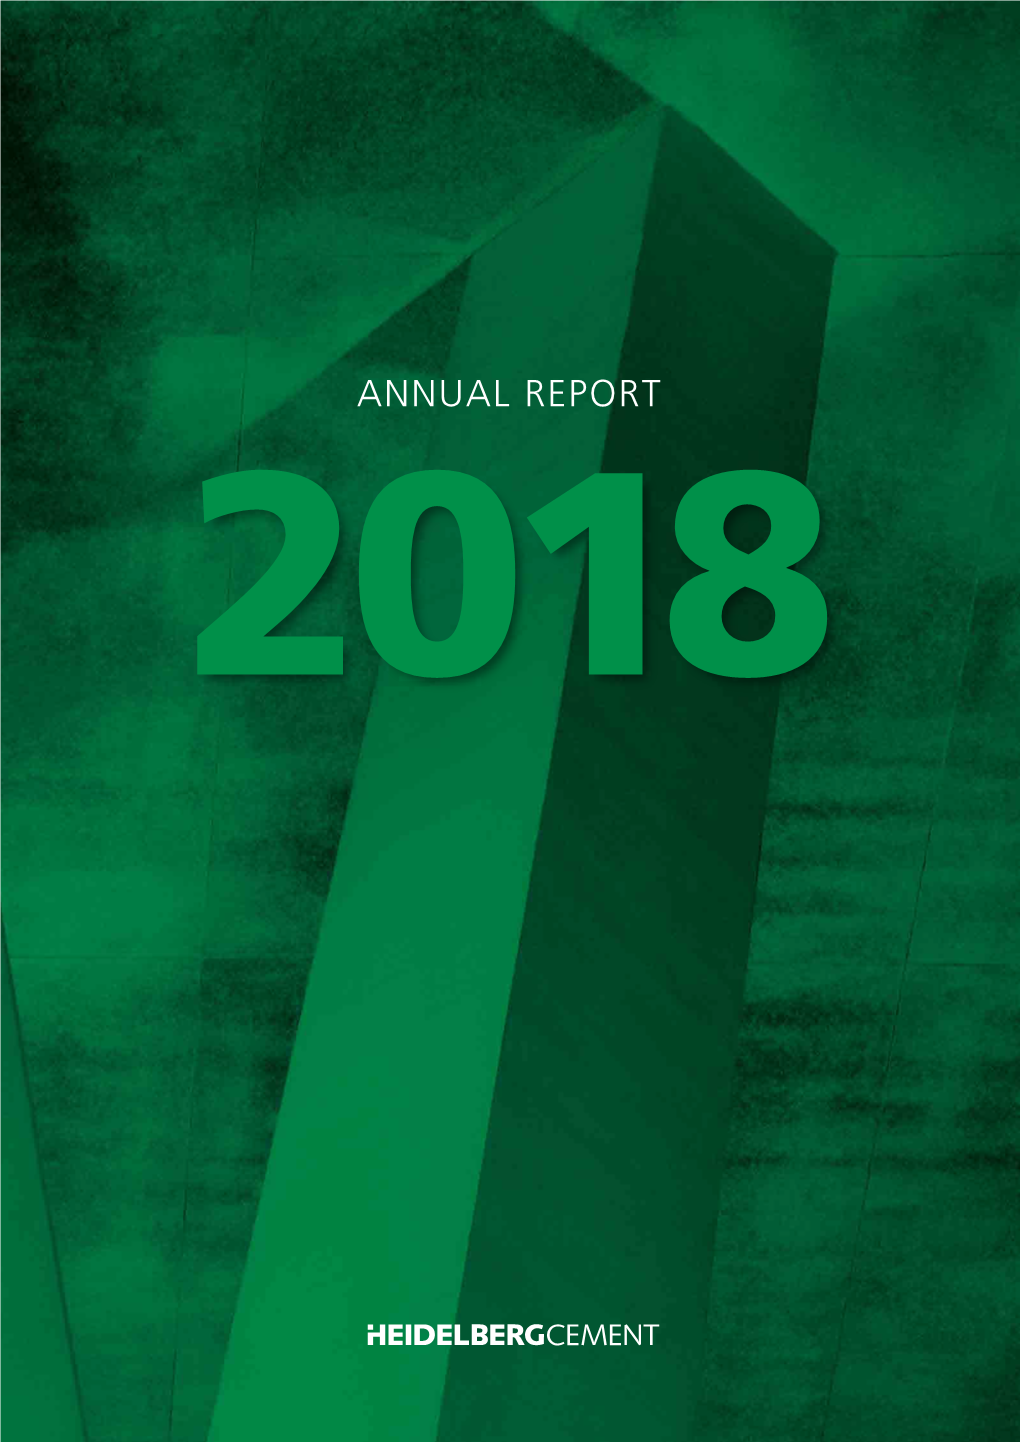 Annual Report 2018 to Our Shareholders To